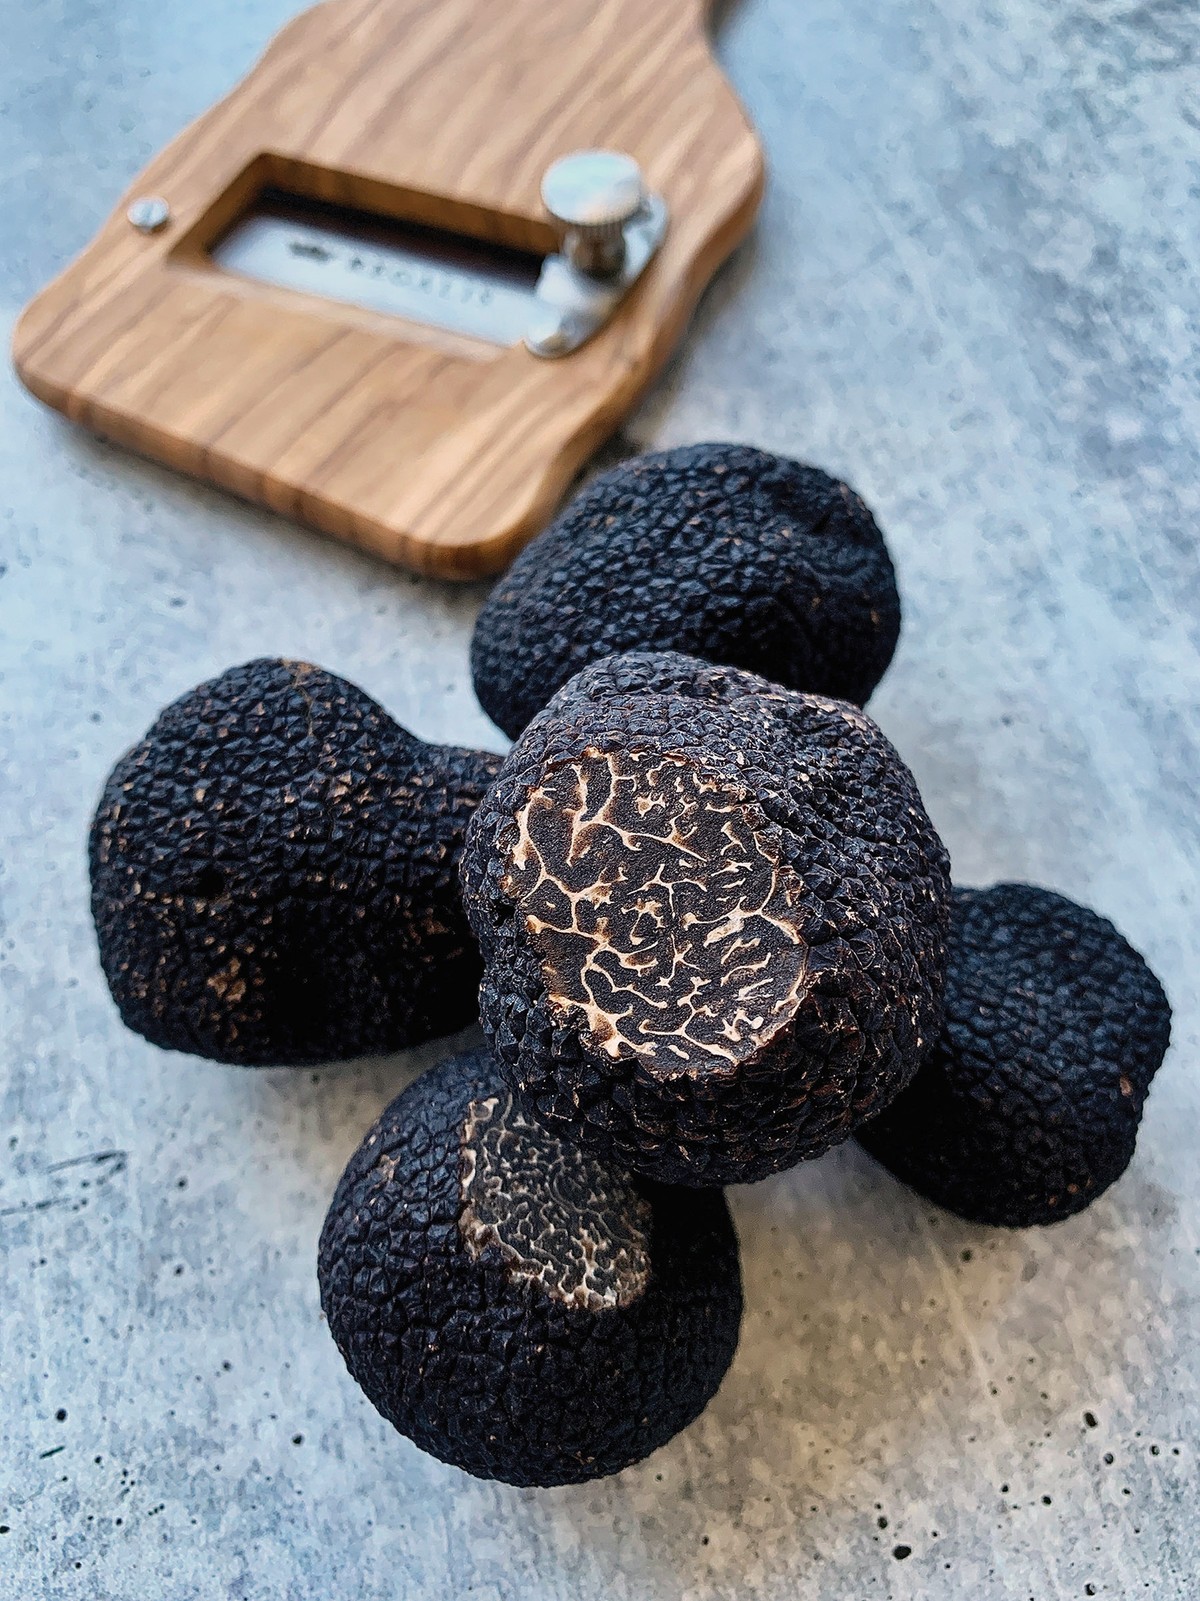 The black winter truffles from Regalis Foods,are the most valuable types of truffles on the market. The black variety has a more earthy flavor